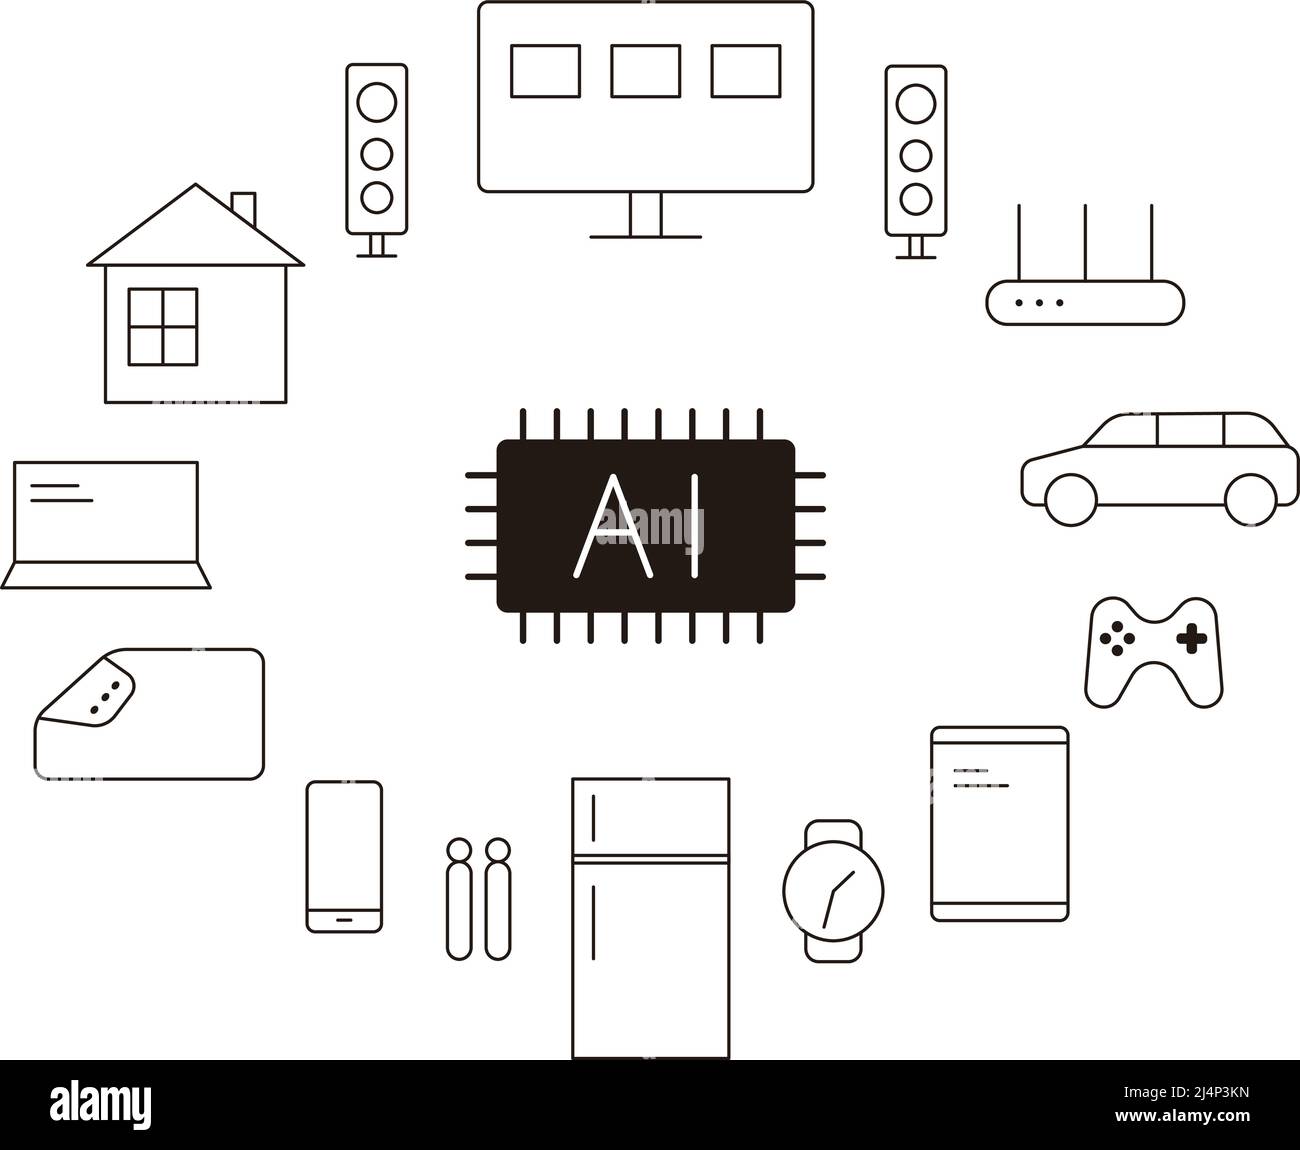 Circuit board, Artificial intelligence IOT concept, electric product, smart home Stock Vector